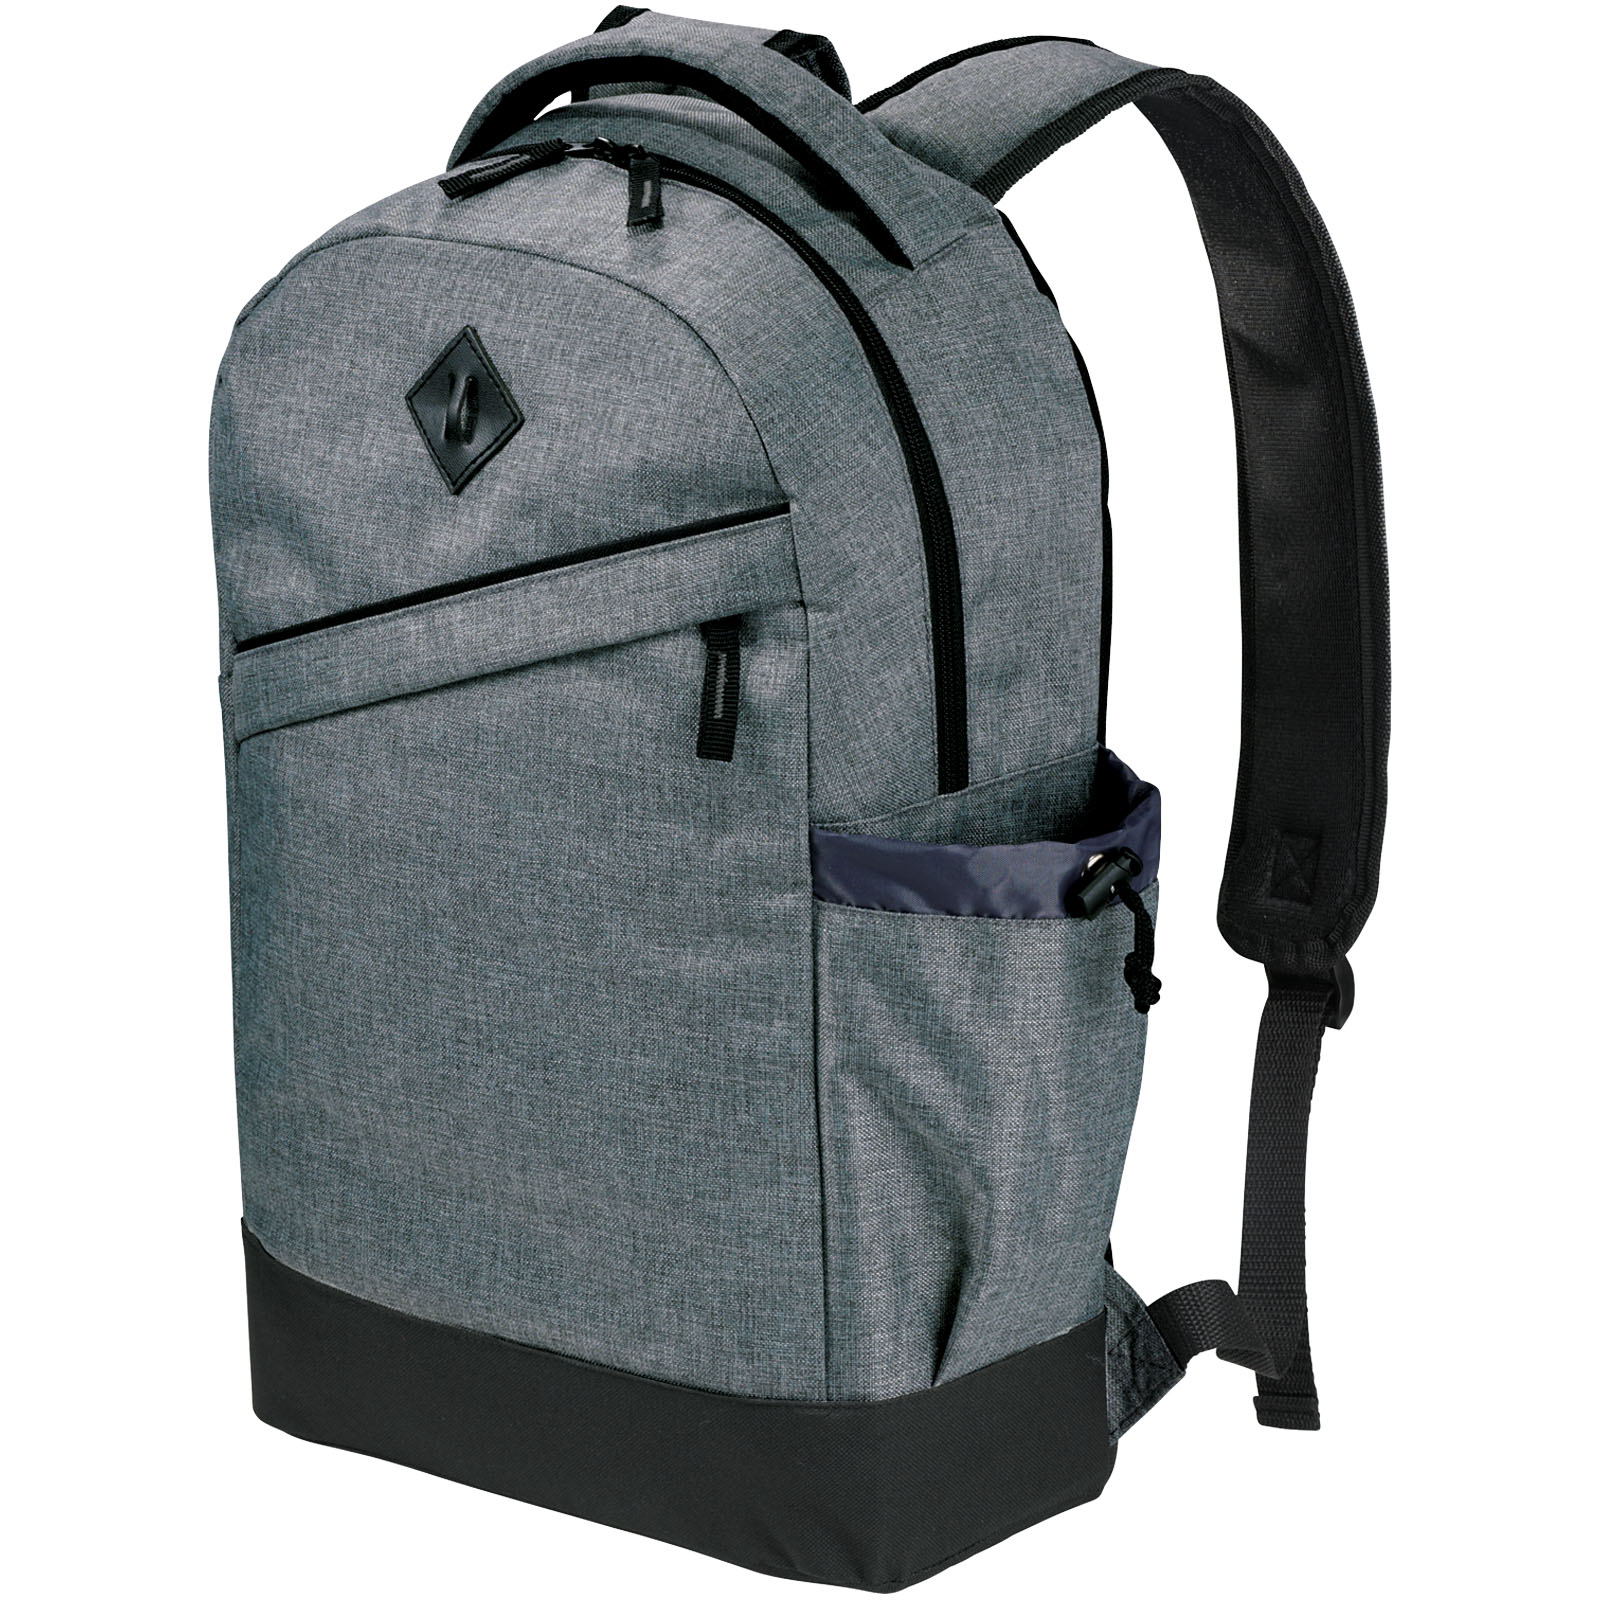 Business Essentials Backpack - Packington